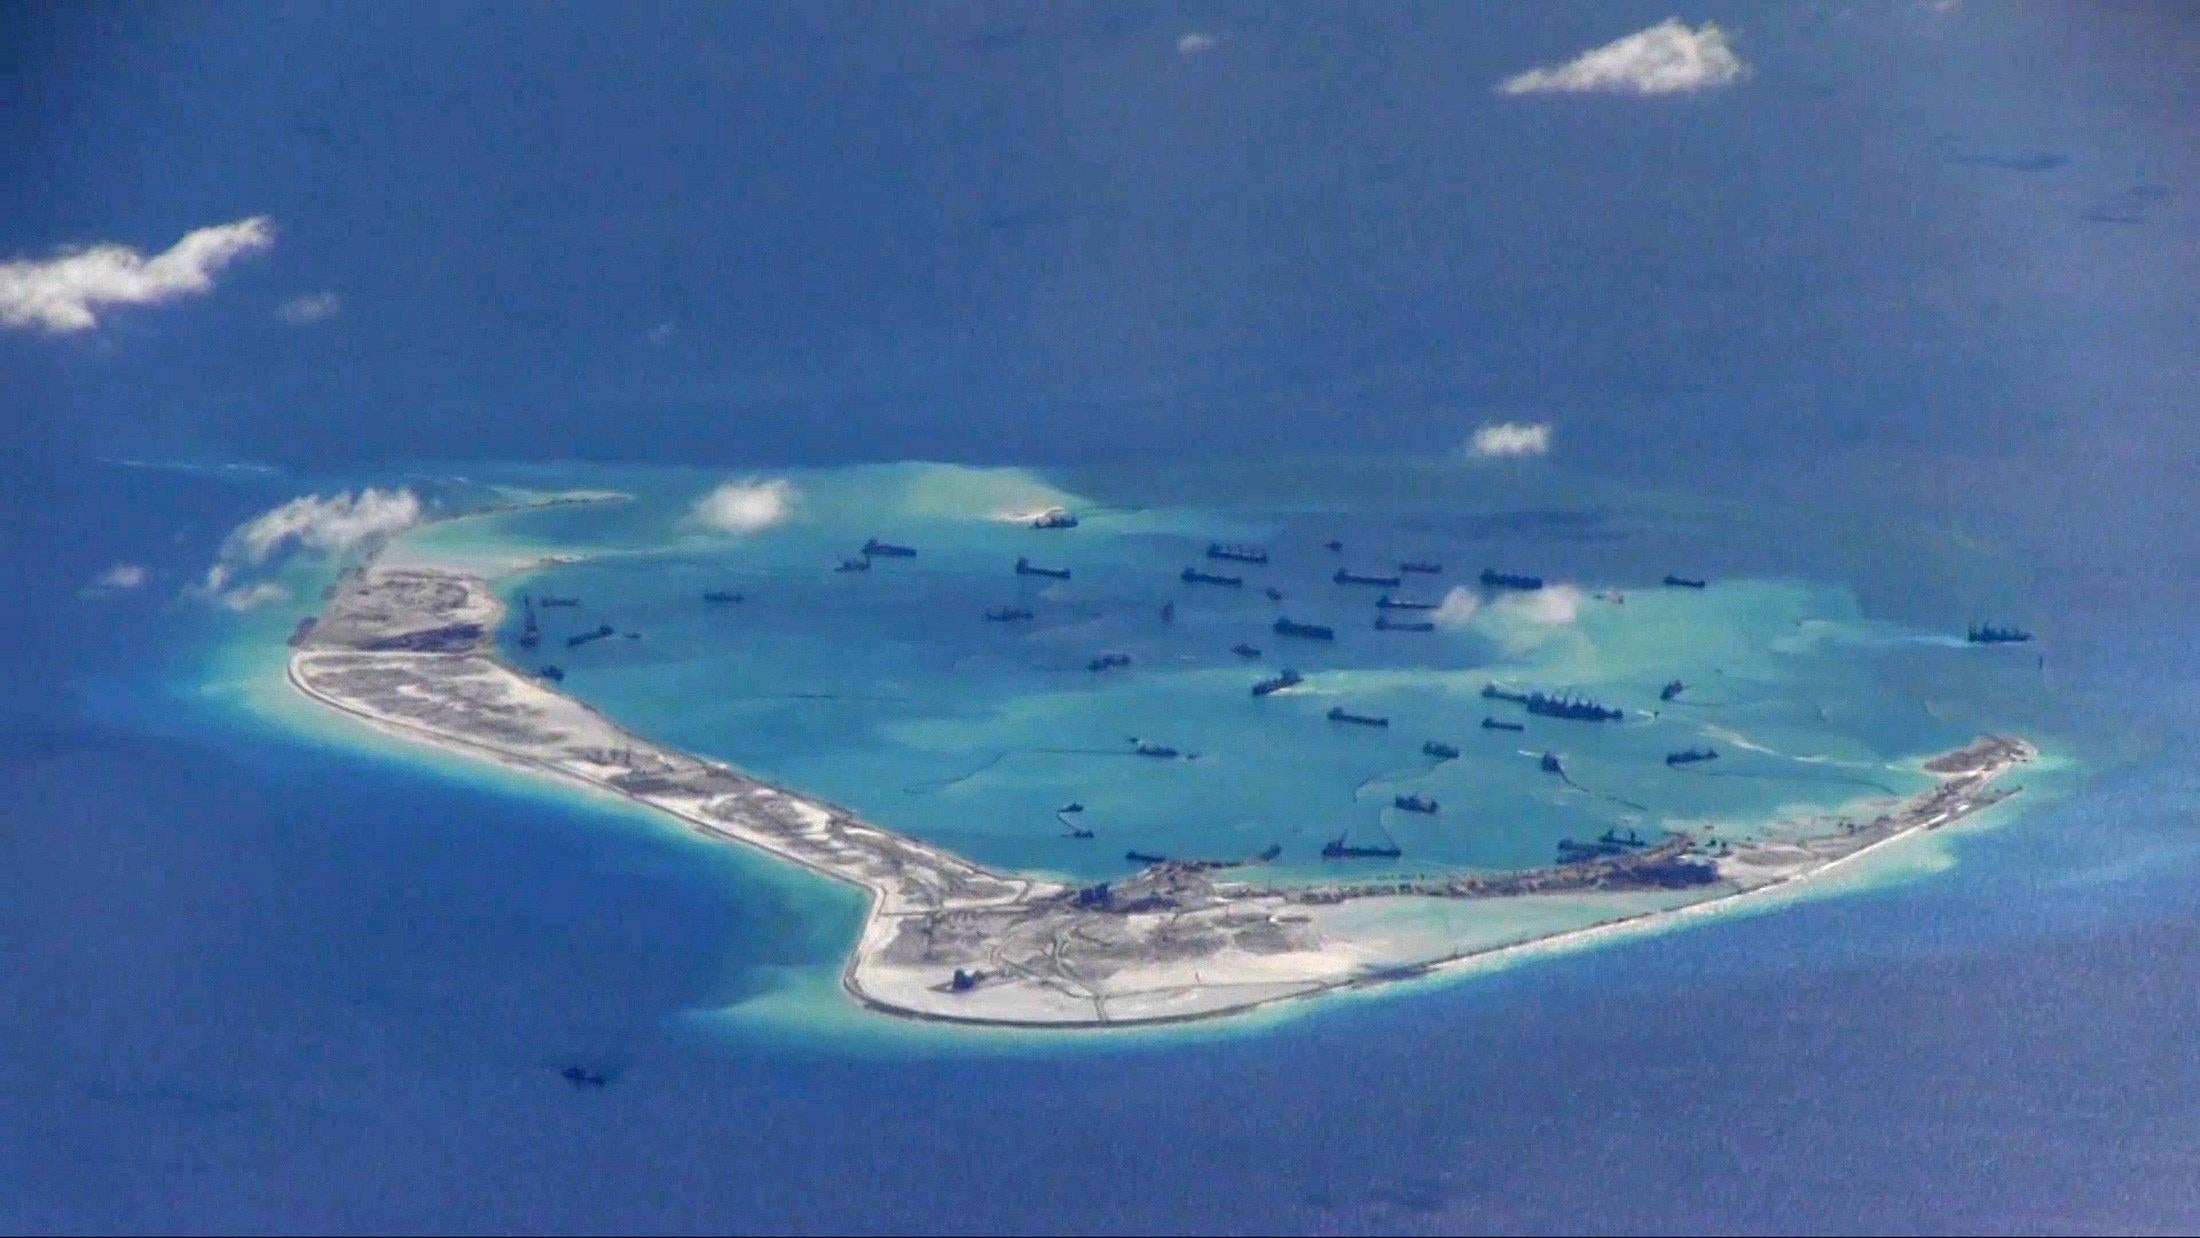 Chinese dredging vessels are purportedly seen in the waters around Mischief Reef in the disputed Spratly Islands, in a still image from video taken by US Navy P-8A Poseidon surveillance aircraft